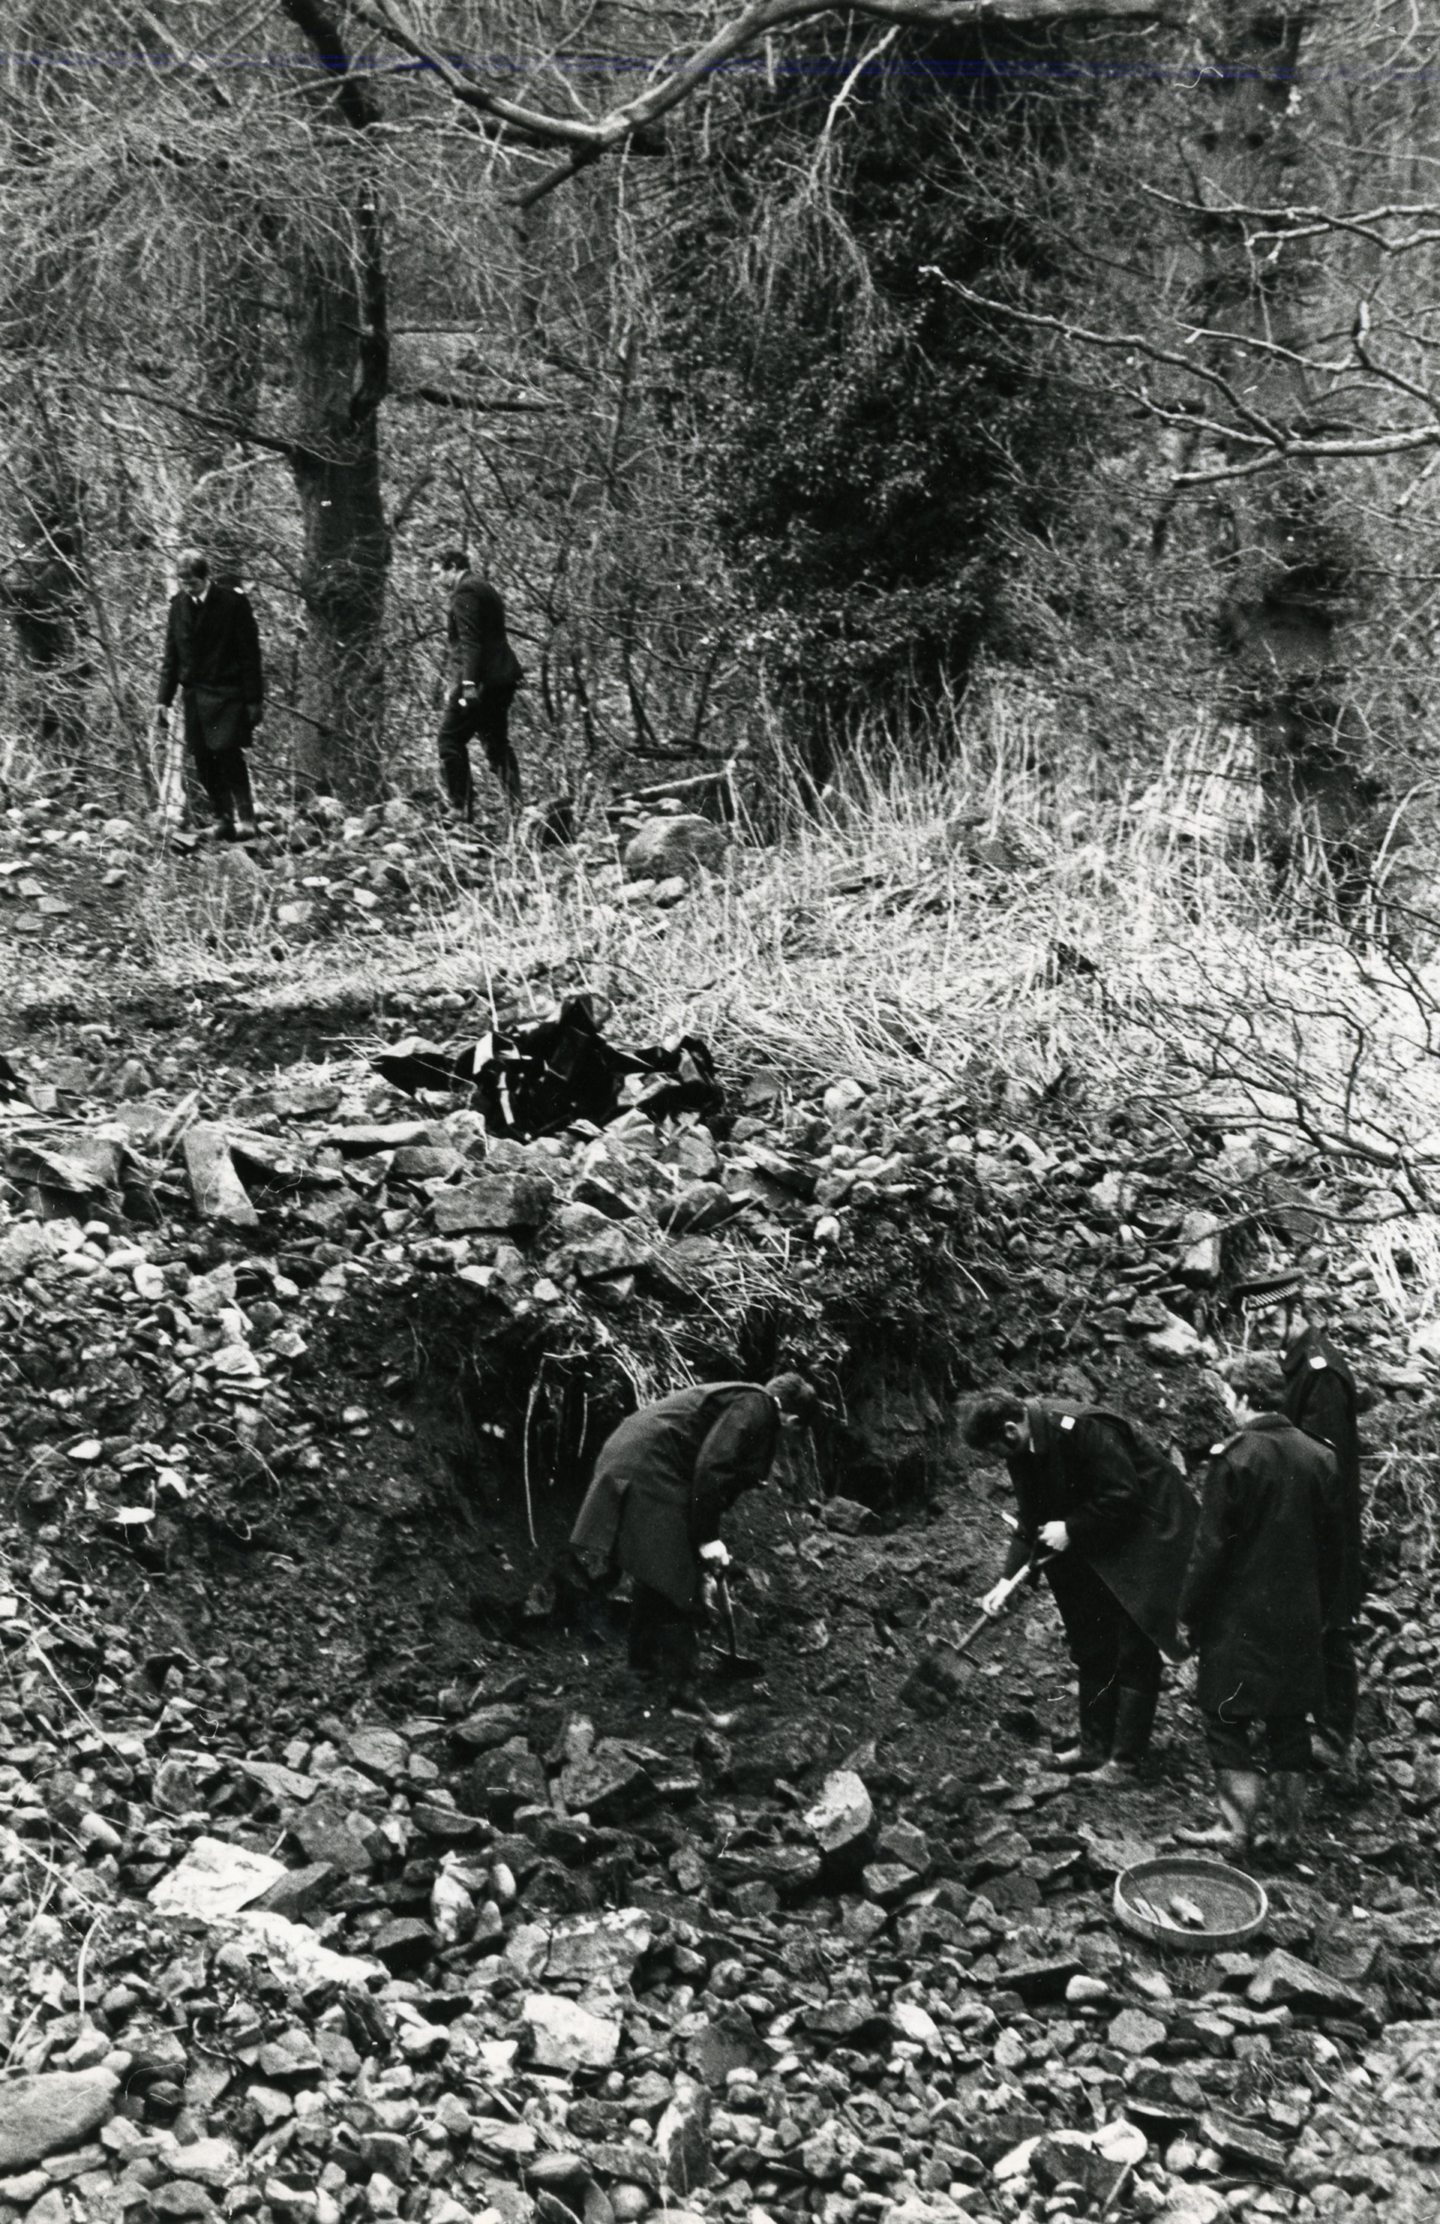 Police digging for more evidence amid the rubble. Image: DC Thomson.